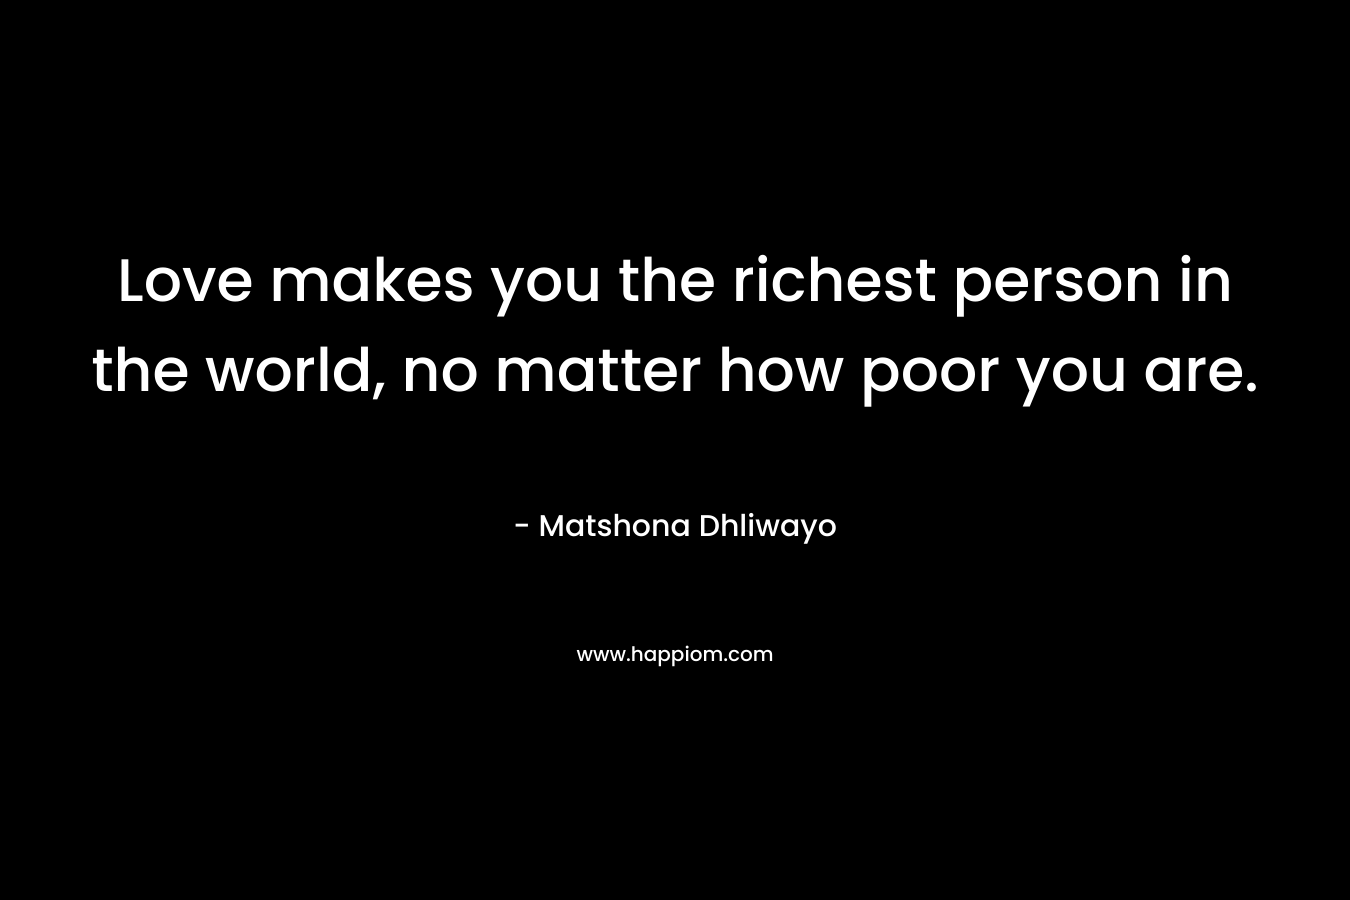 Love makes you the richest person in the world, no matter how poor you are.